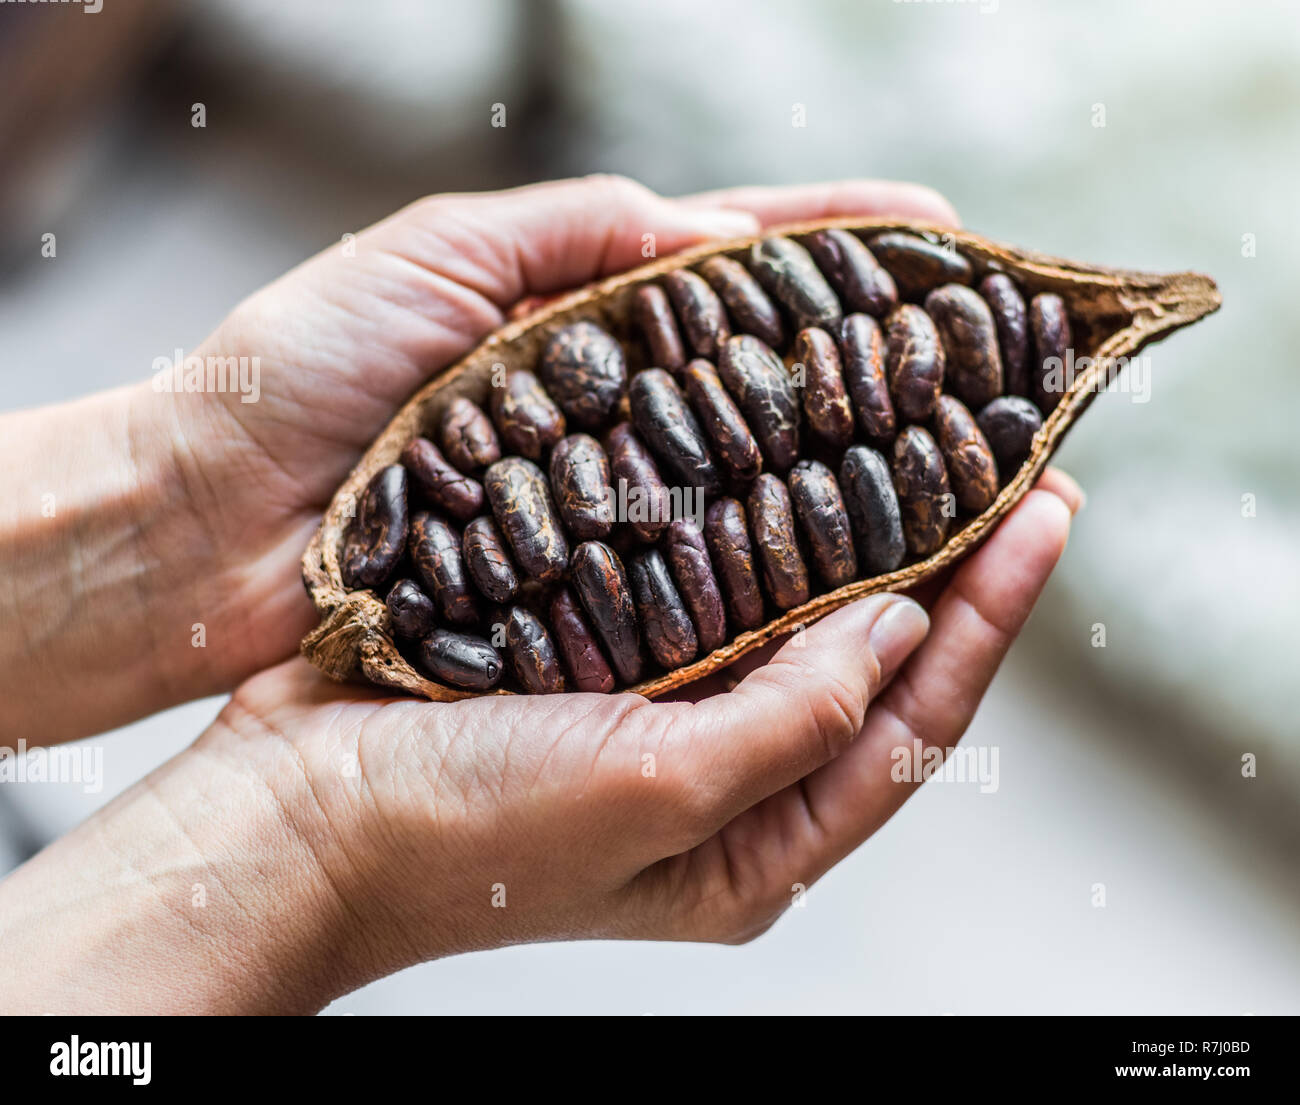 Cocoa pod in the hands close-up. Stock Photo